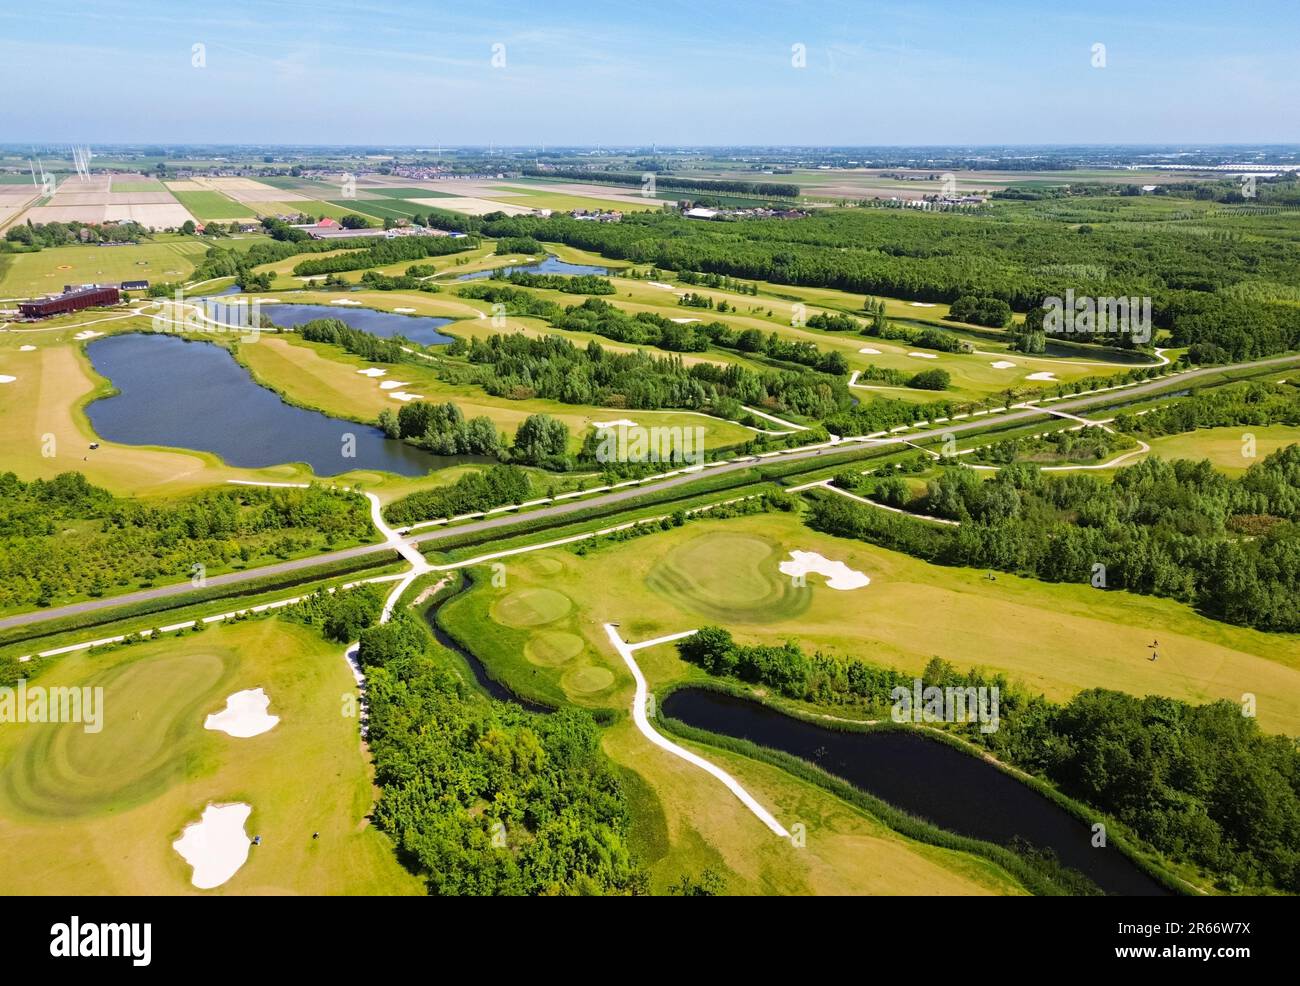 Aerial view of golf course 'Bentwoud' near the city of Zoetermeer, Netherlands Stock Photo